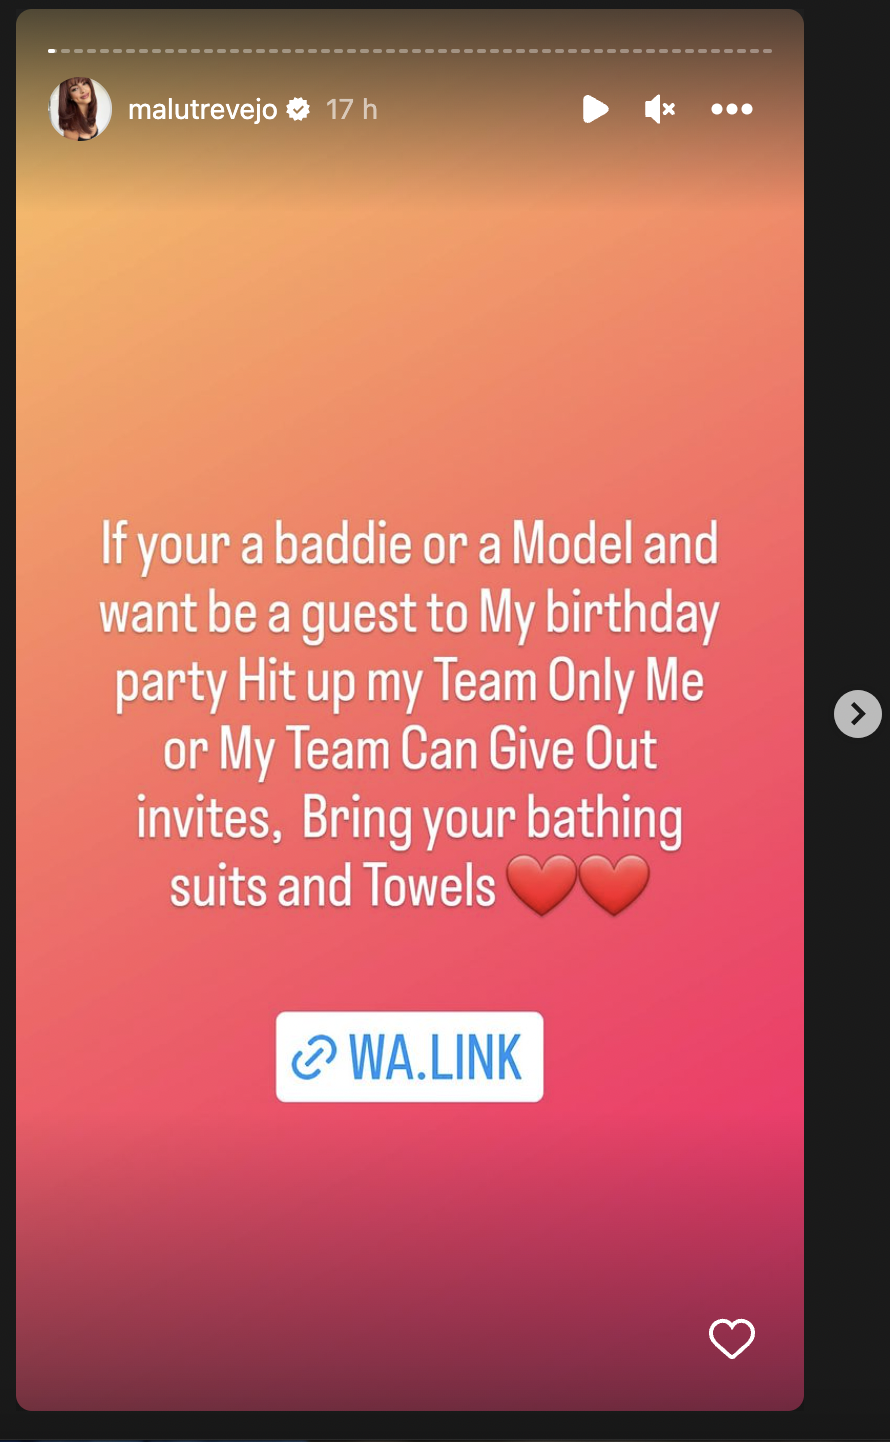 Malu Trevejo invited people to her birthday party.